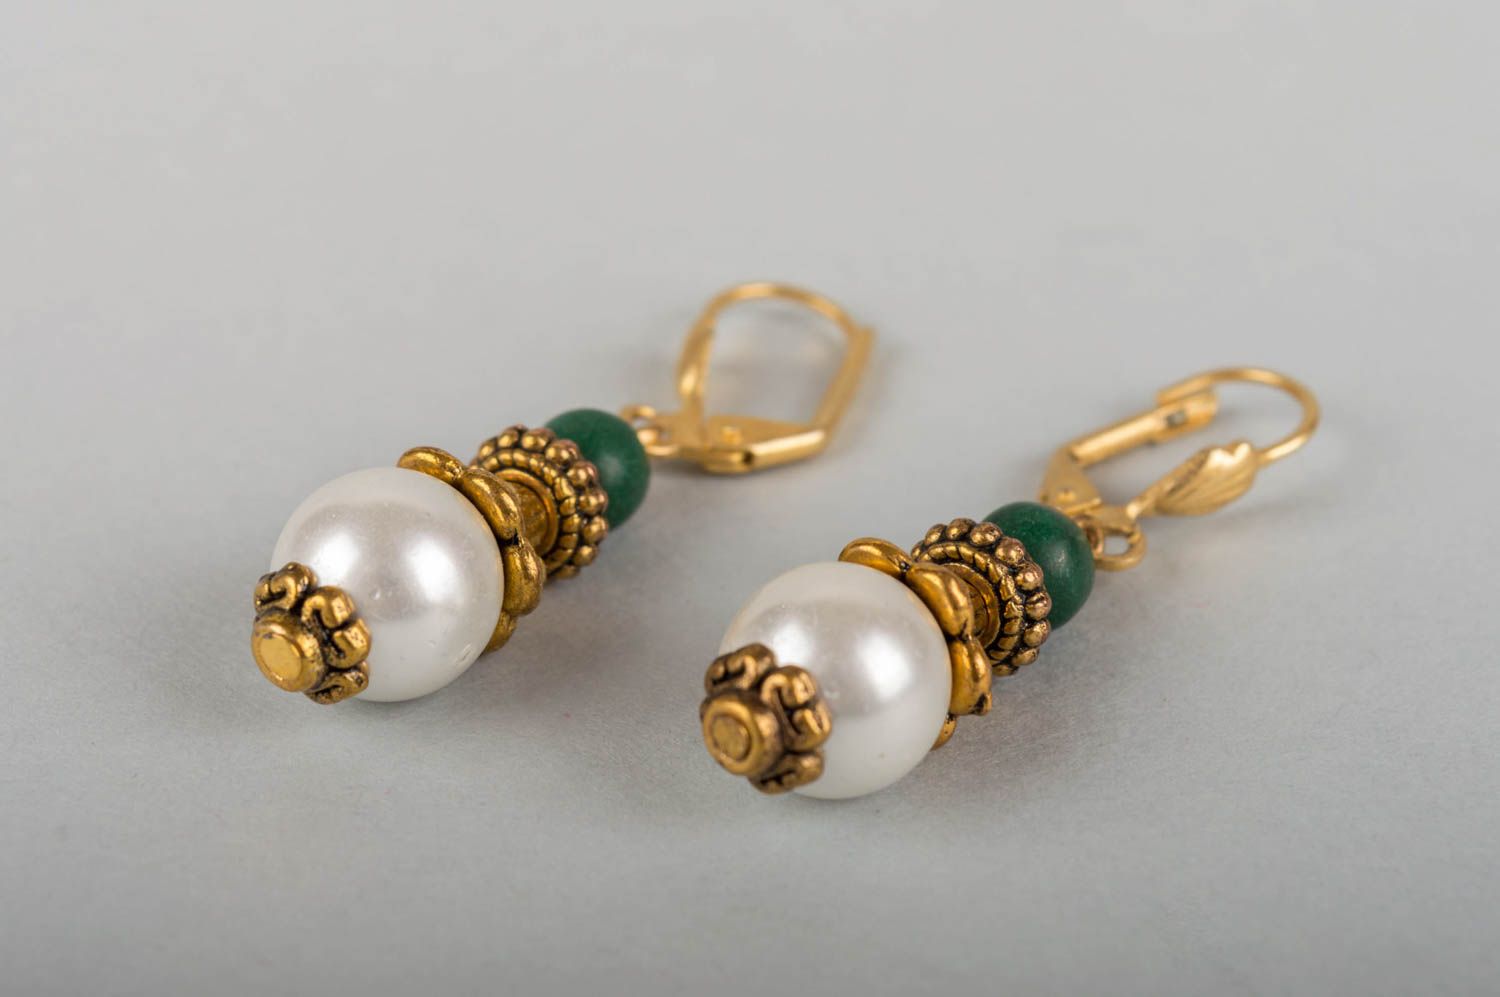 Brass earrings with agate and pearls handmade evening accessory for women photo 3